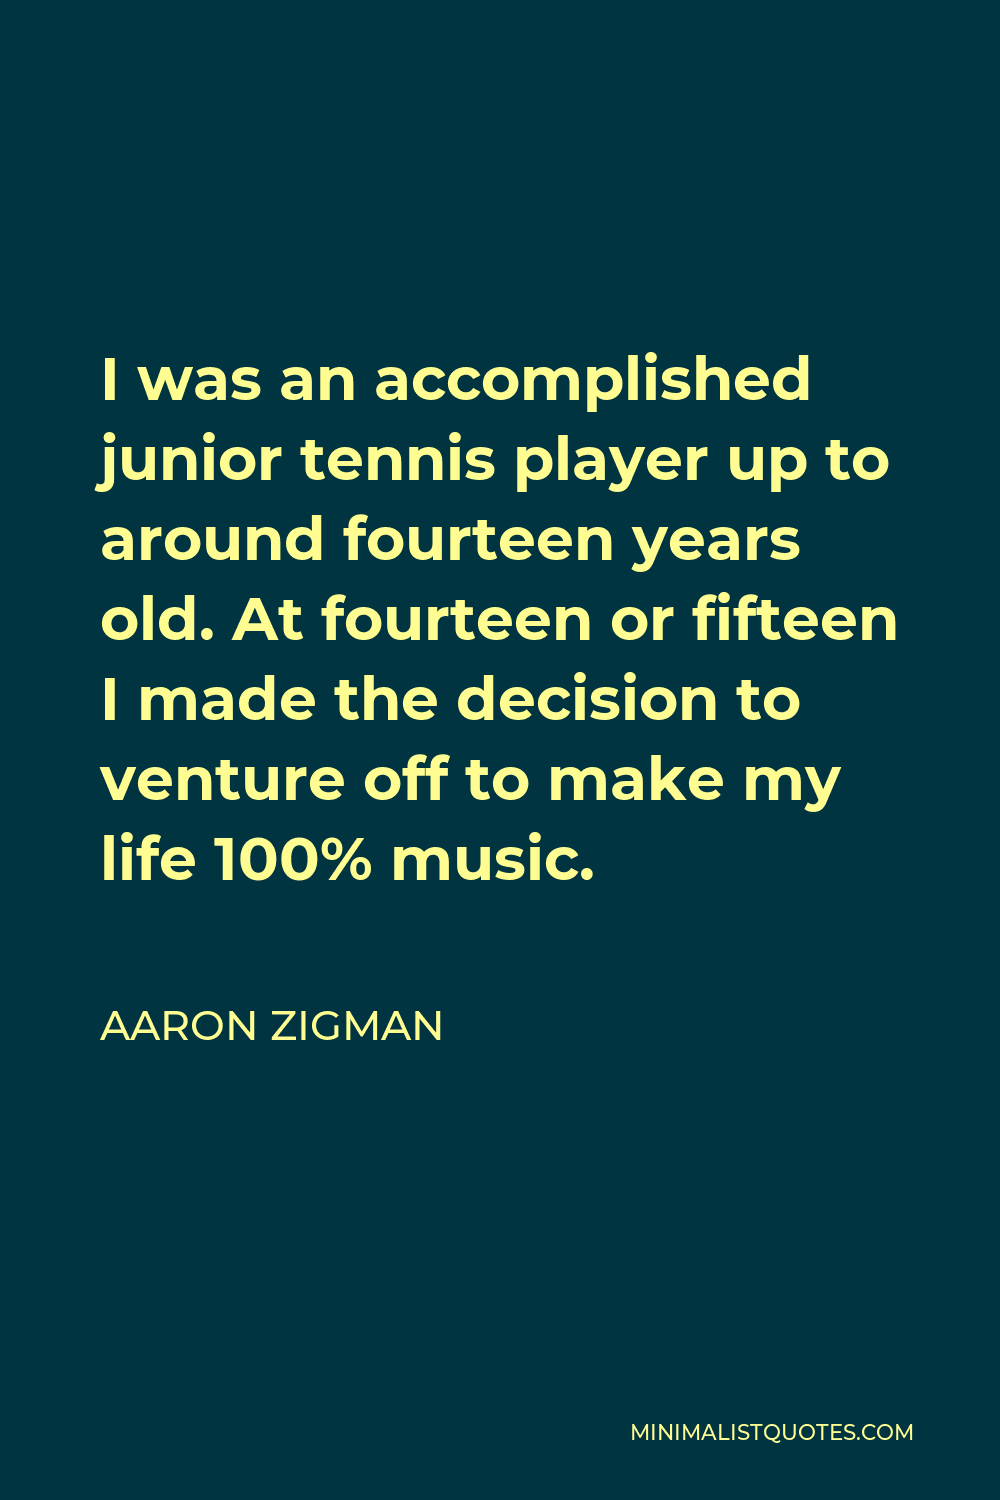 Aaron Zigman Quote - I was an accomplished junior tennis player up to around fourteen years old. At fourteen or fifteen I made the decision to venture off to make my life 100% music.